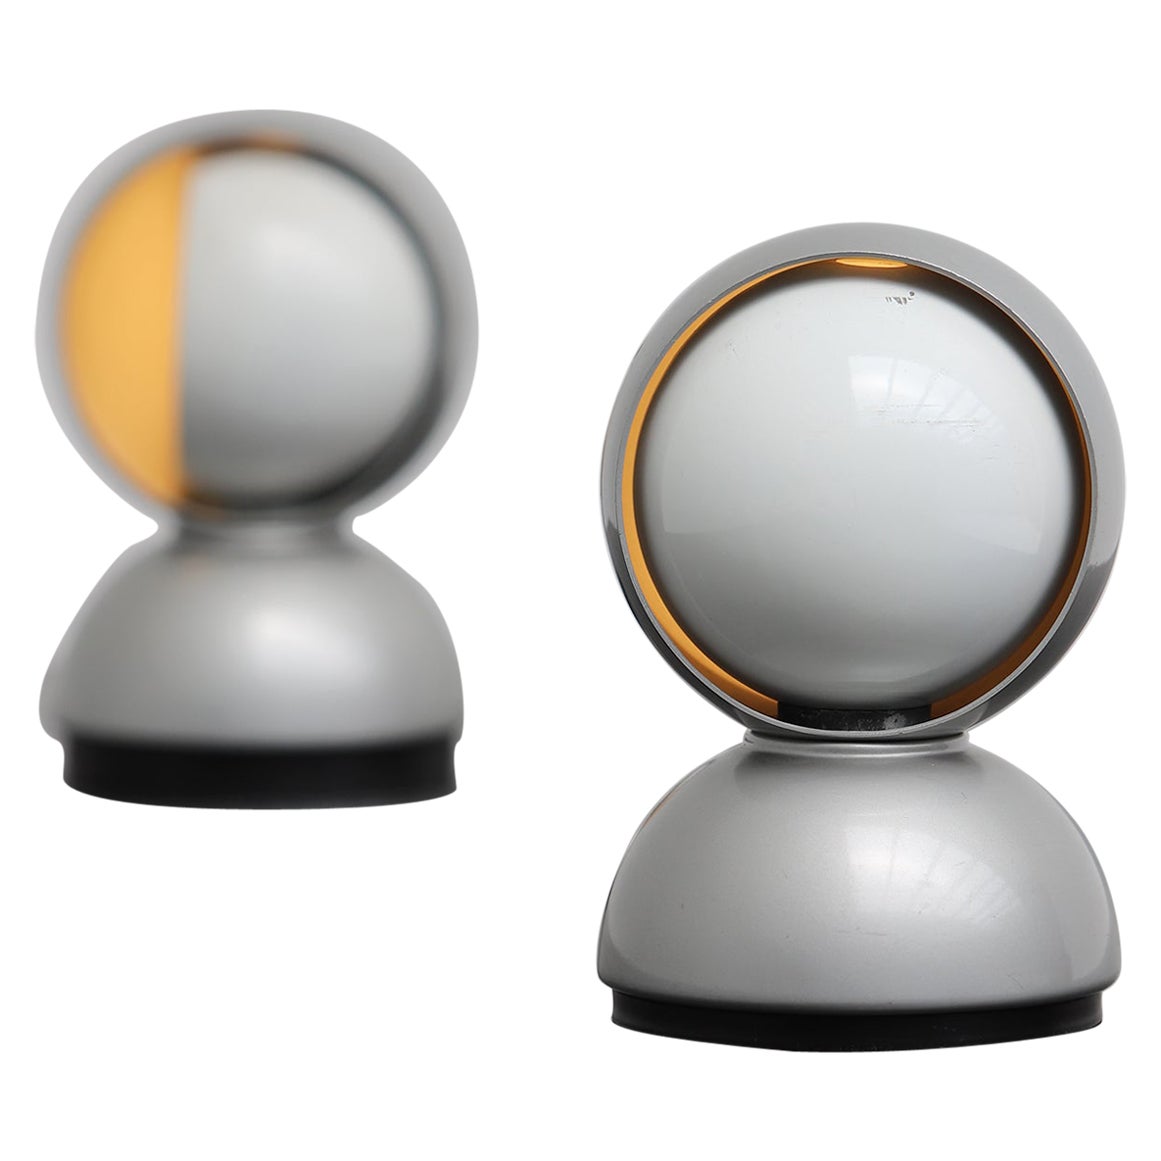 Pair of eclisse lamps designed by Vico Magistretti in 1965 for Artemide